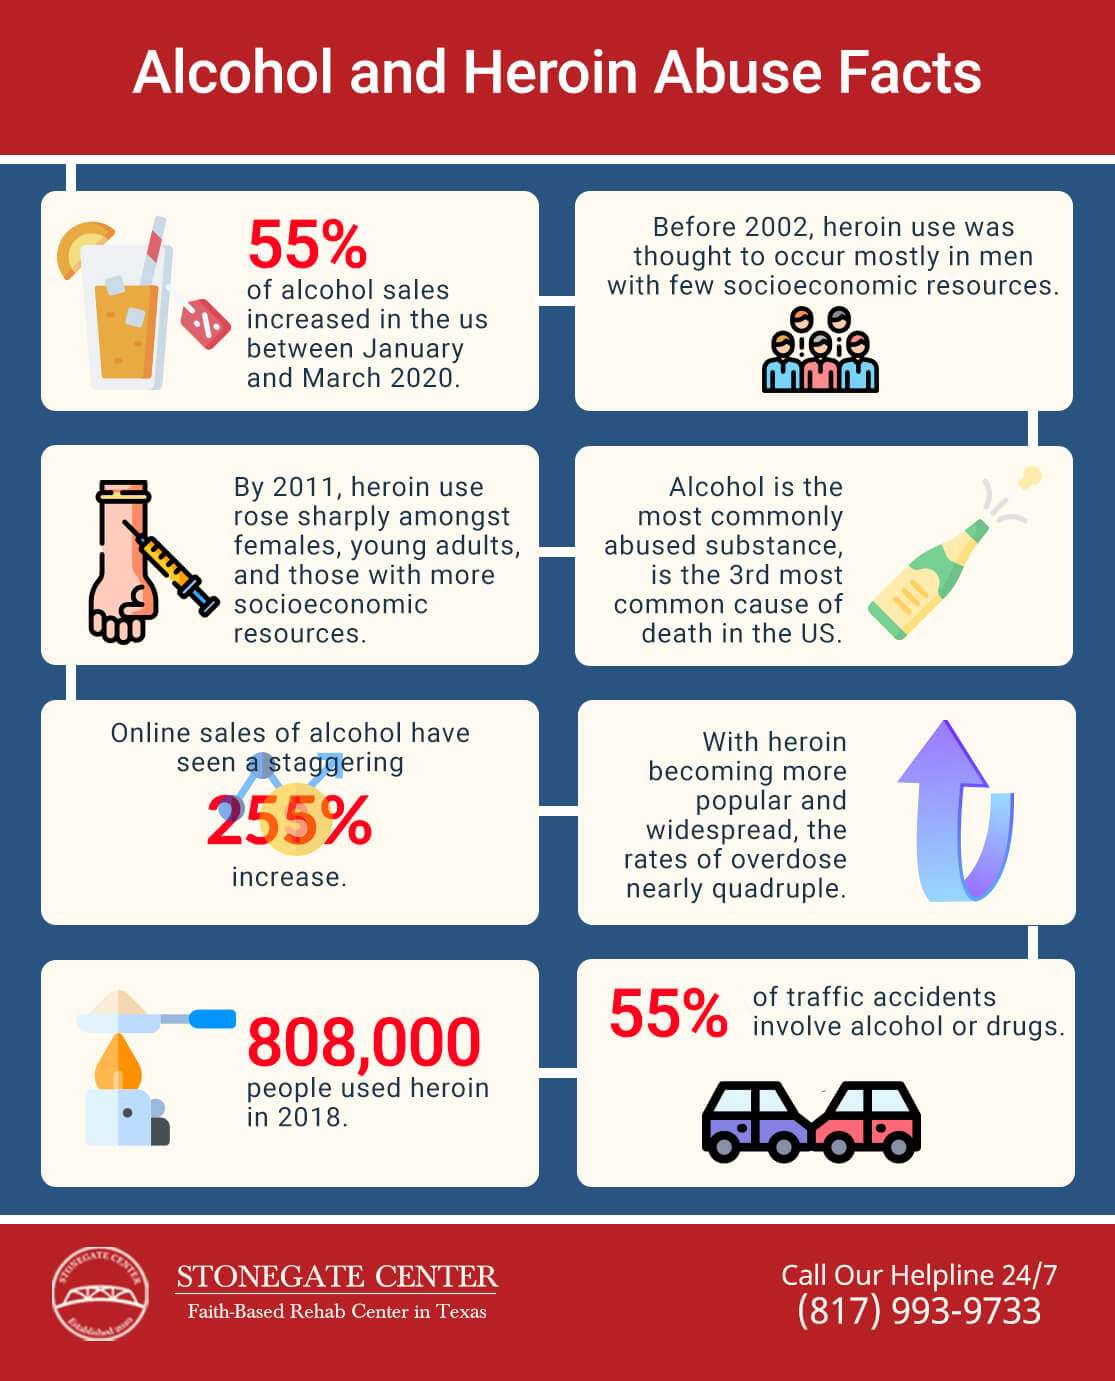 Stonegate Center Blog - Alcohol Withdrawal is More Dangerous Than Heroin Withdrawal - Alcohol and Heroin Abuse Infographics